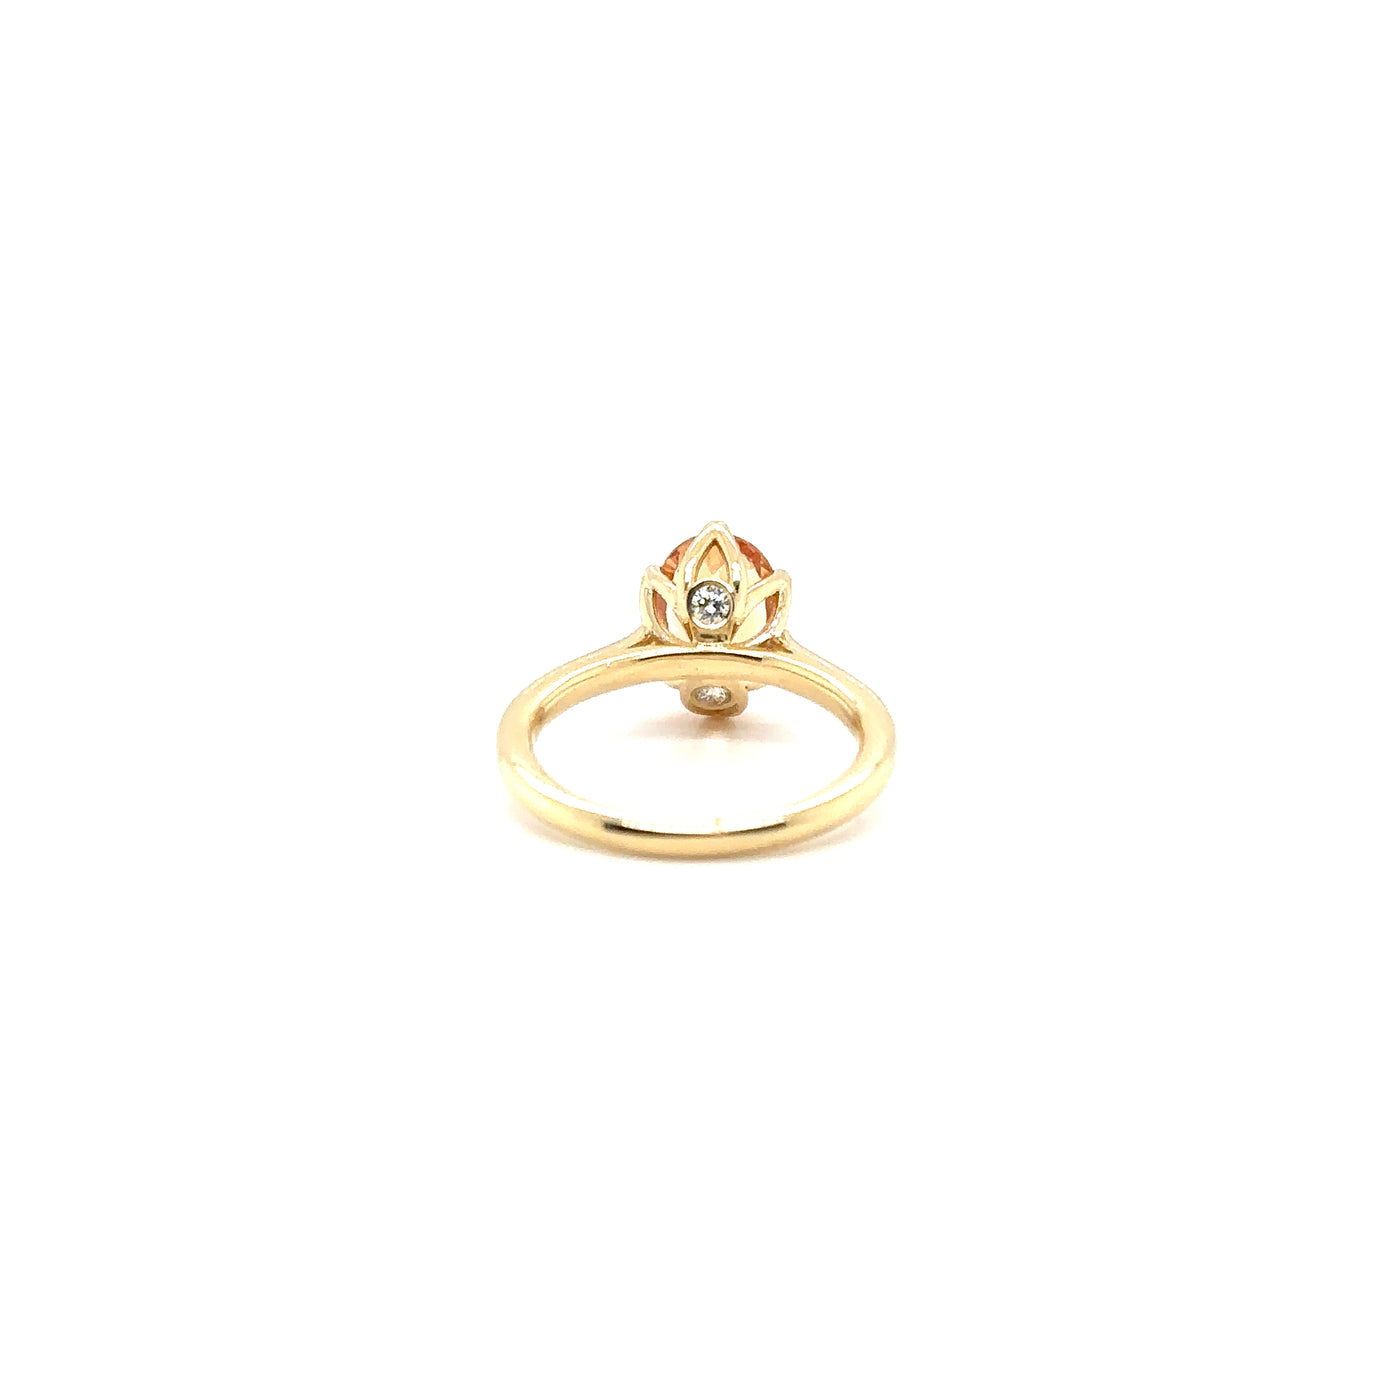 Imperial Topaz “Ivy” Ring